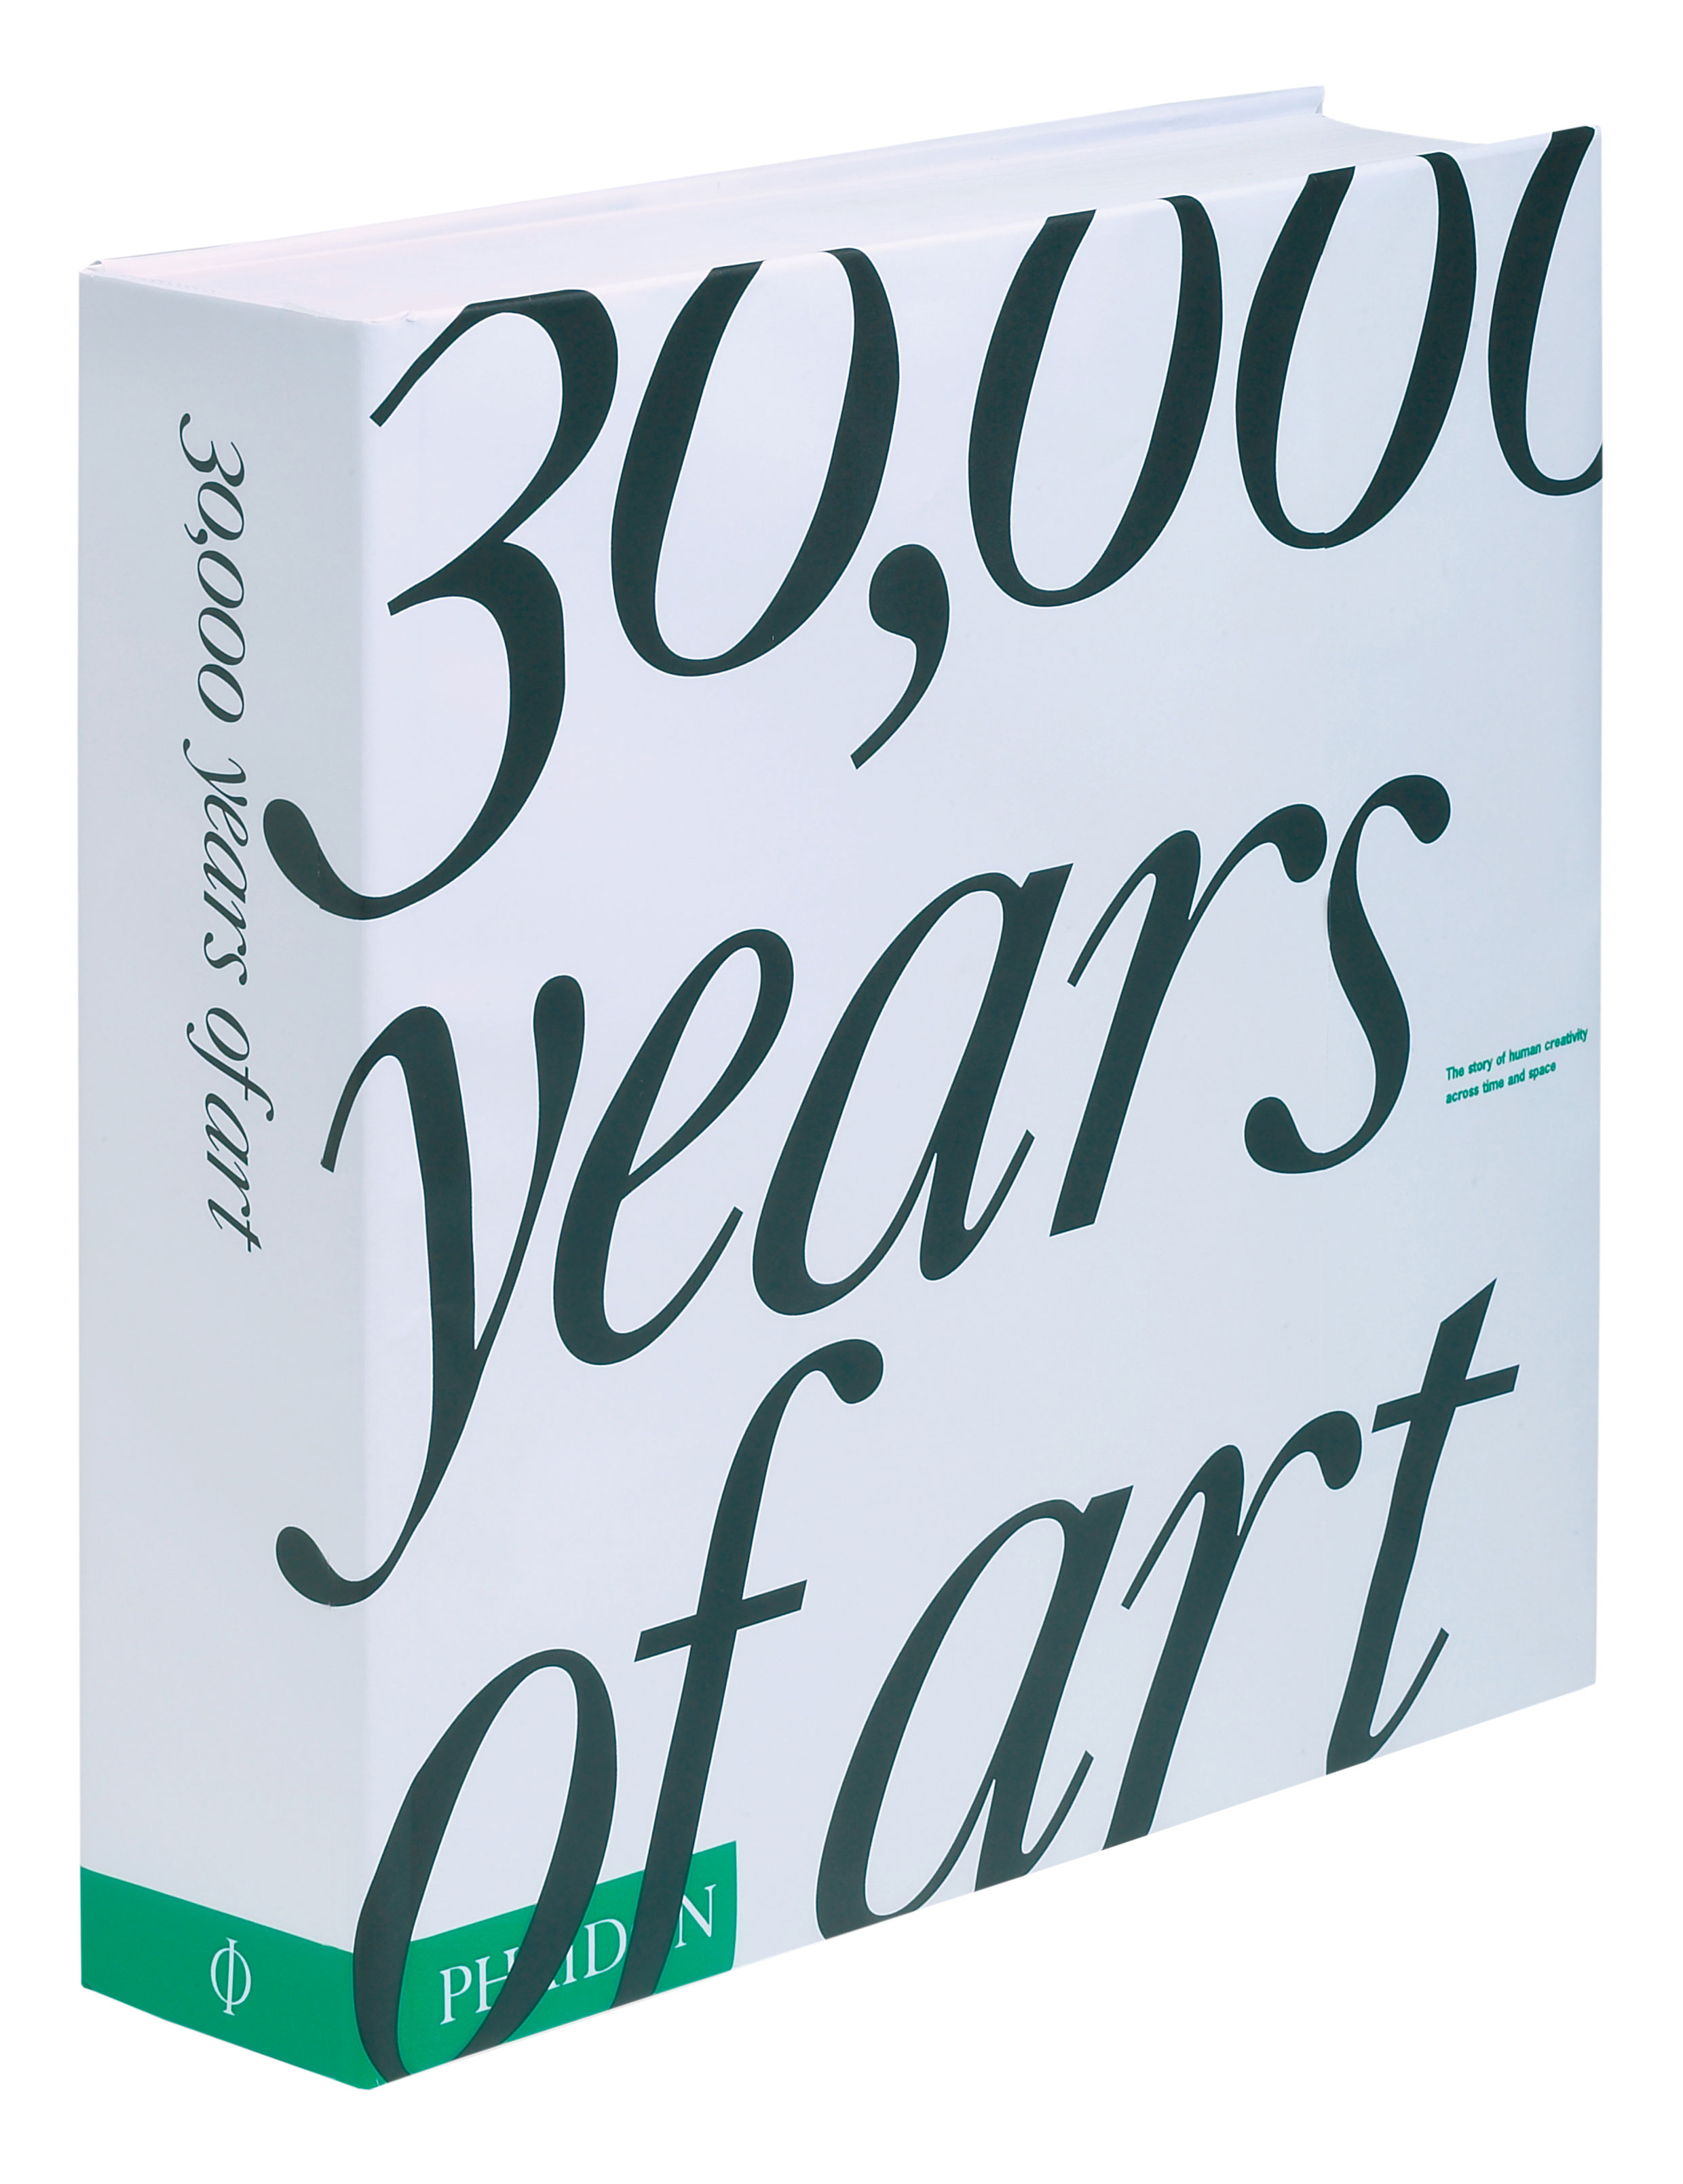 The original, 2007 edition of 30,000 Years of Art